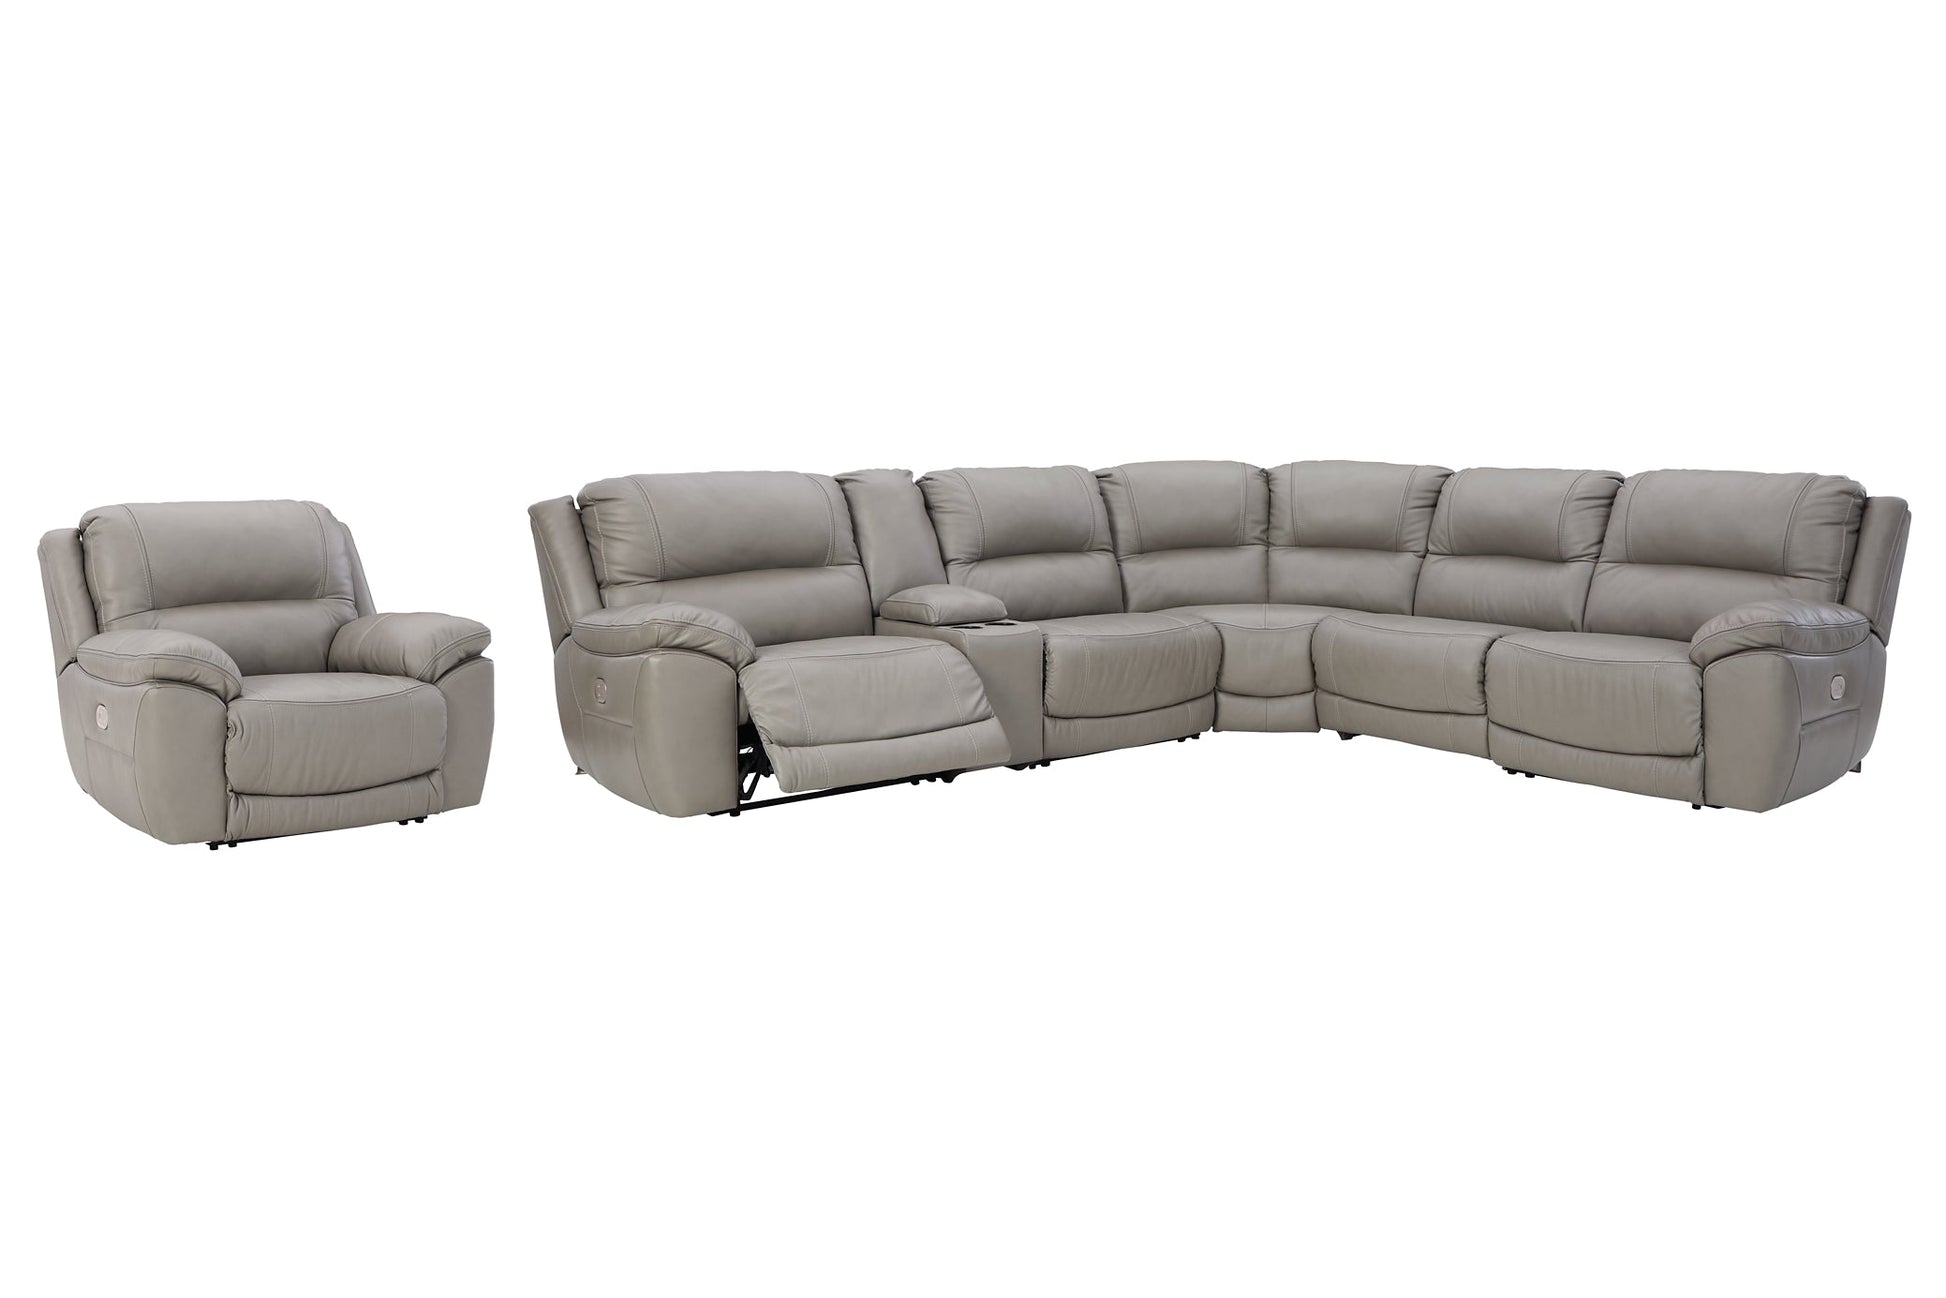 Dunleith 6-Piece Sectional with Recliner Rent Wise Rent To Own Jacksonville, Florida